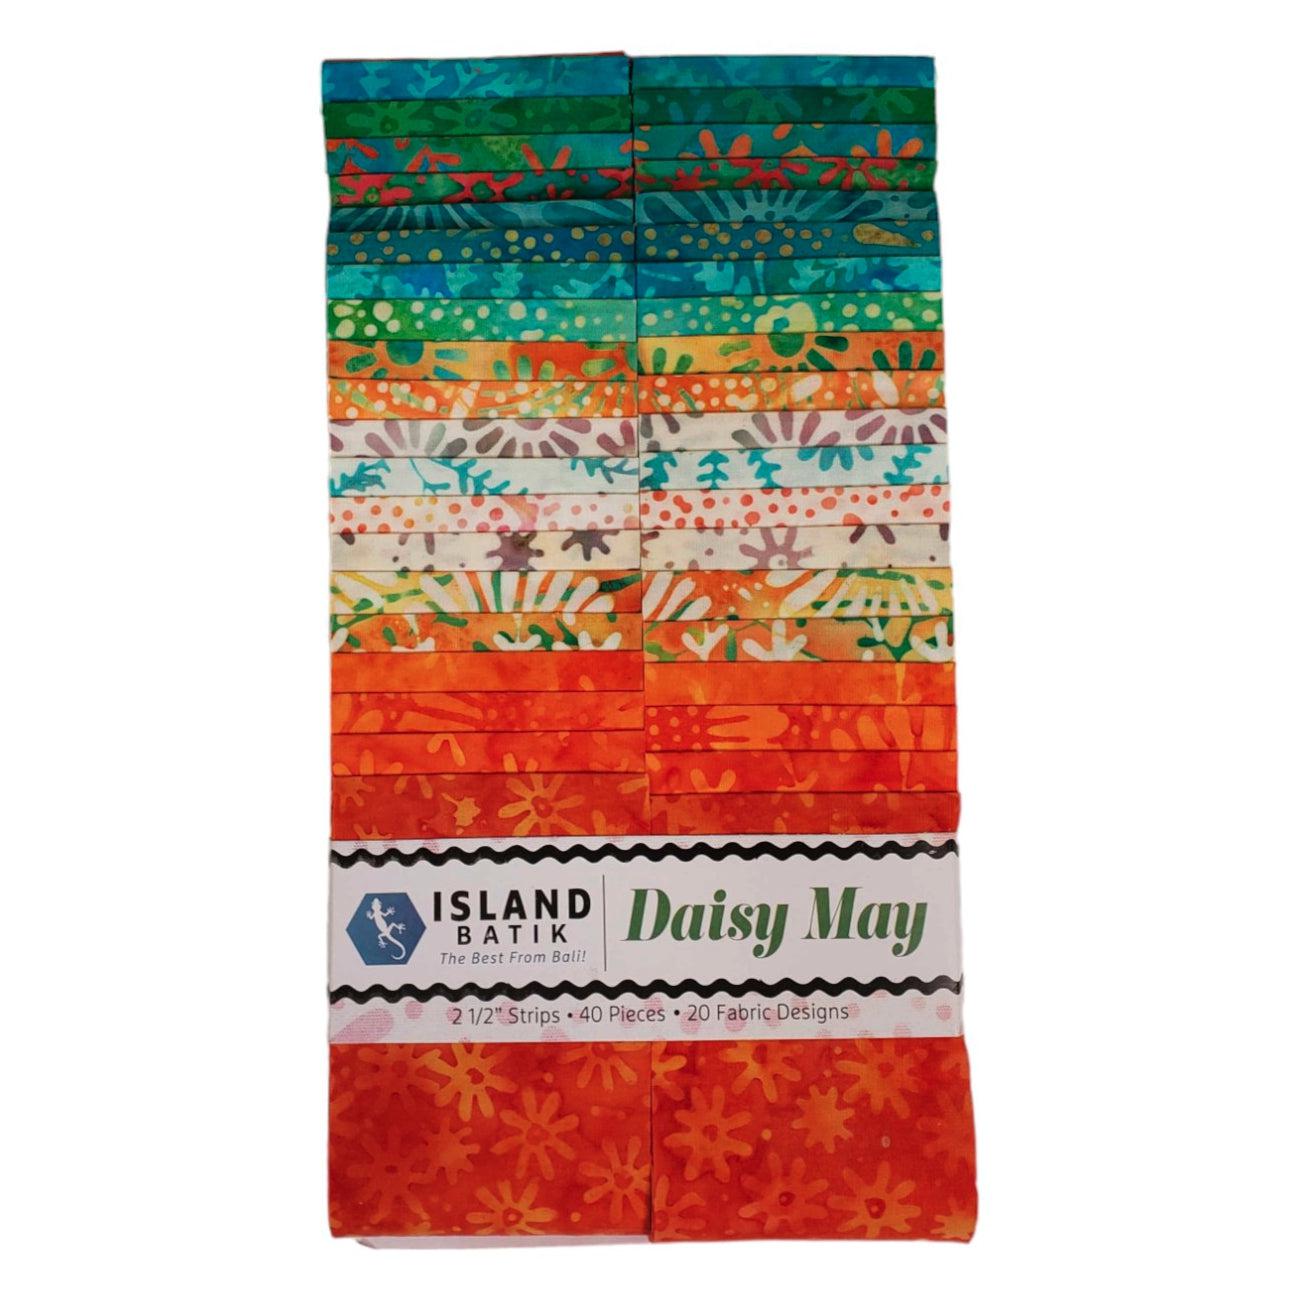 Daisy May 2 1/2" Strip Pack-Island Batik-My Favorite Quilt Store